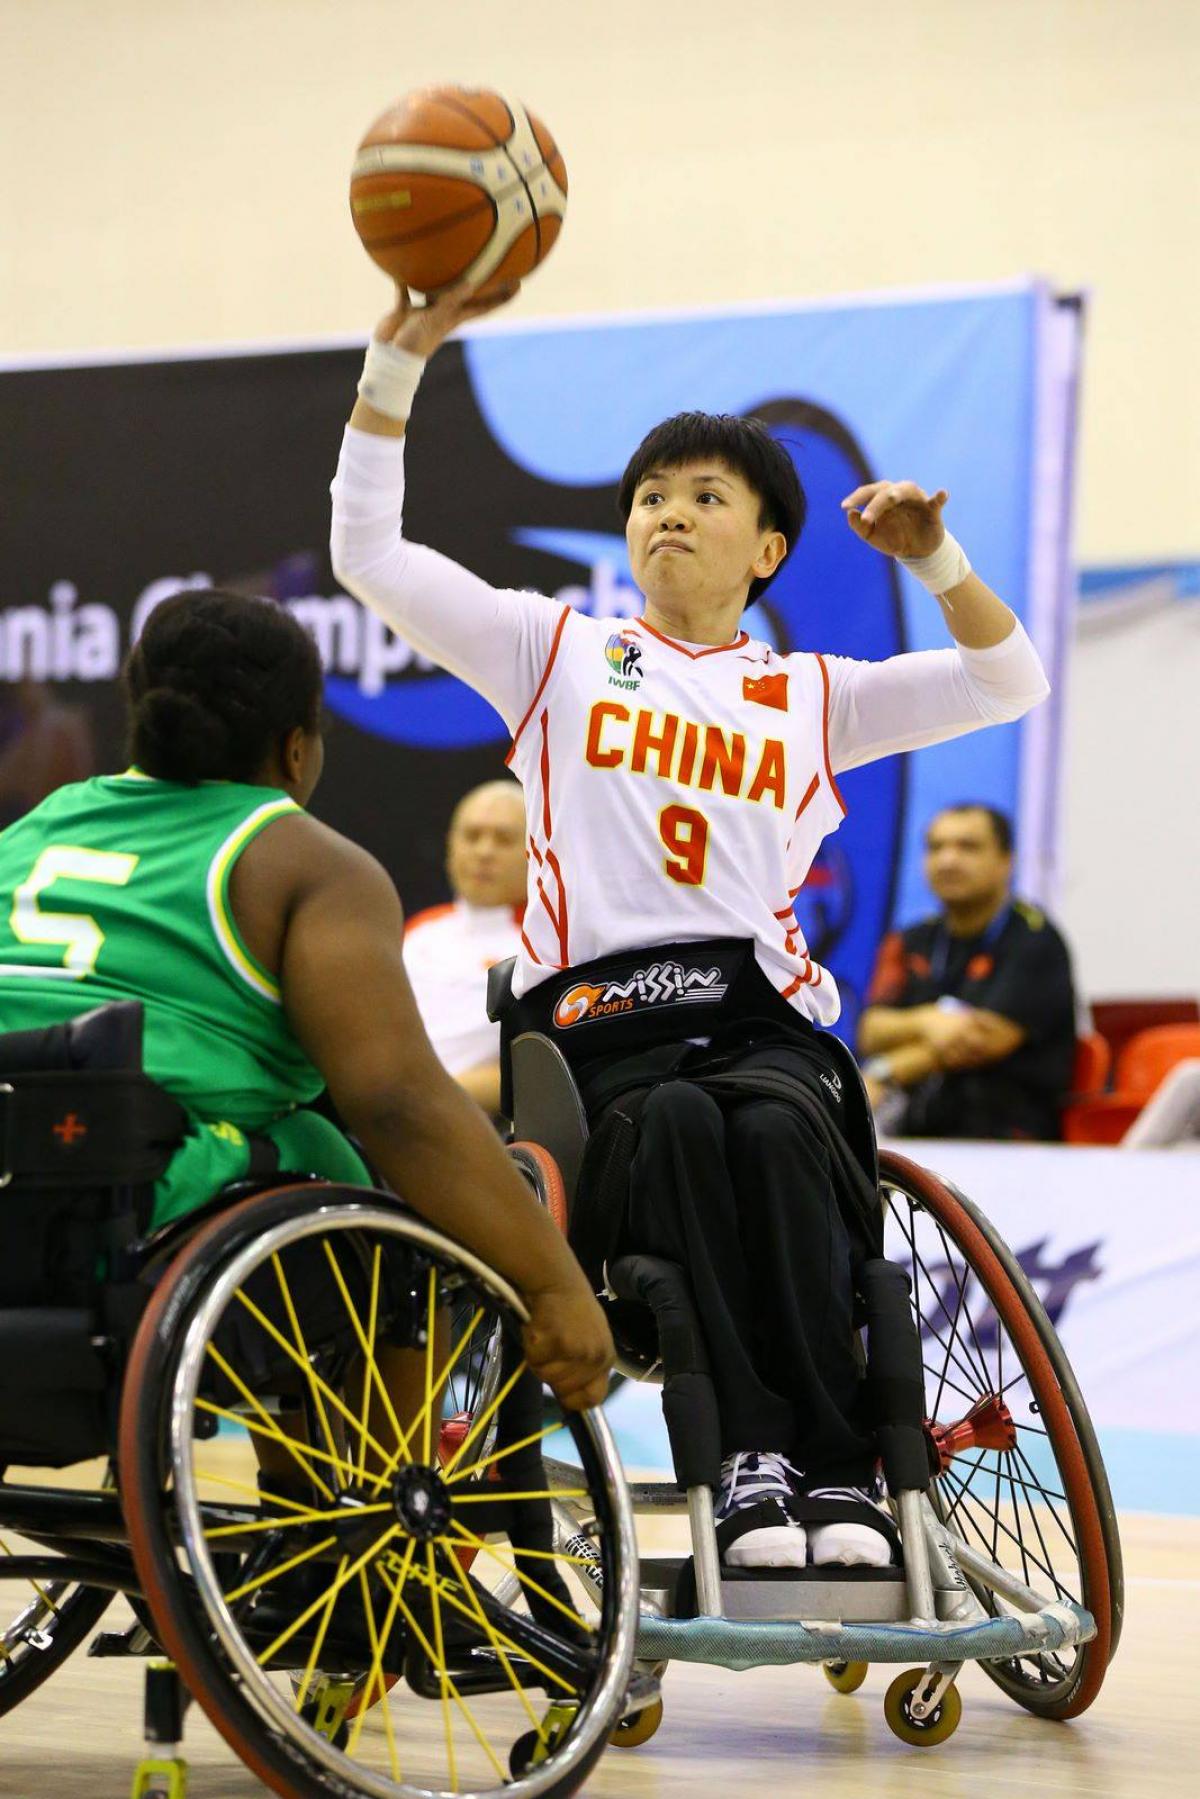 Chinese woman in wheelchair about to shoot basketball